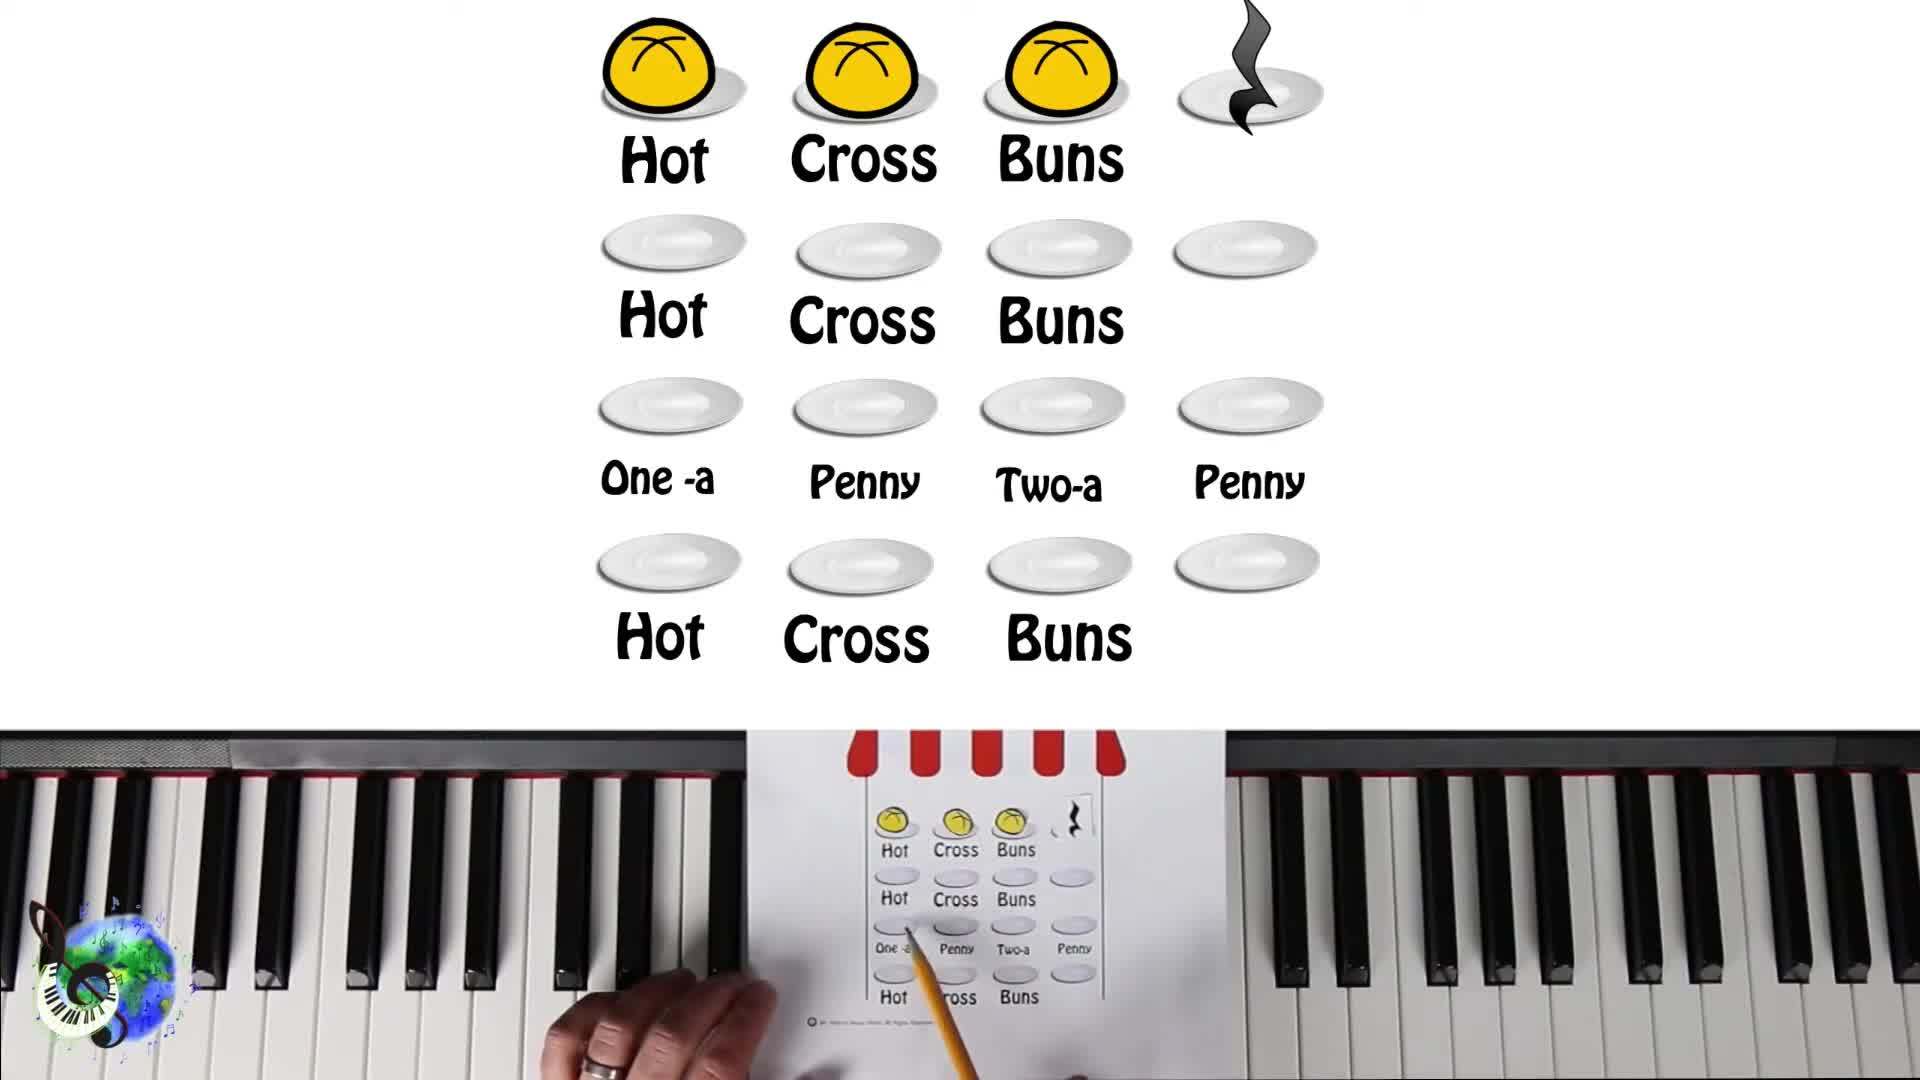 Hot Cross Buns for Kids Easy Piano Lesson!